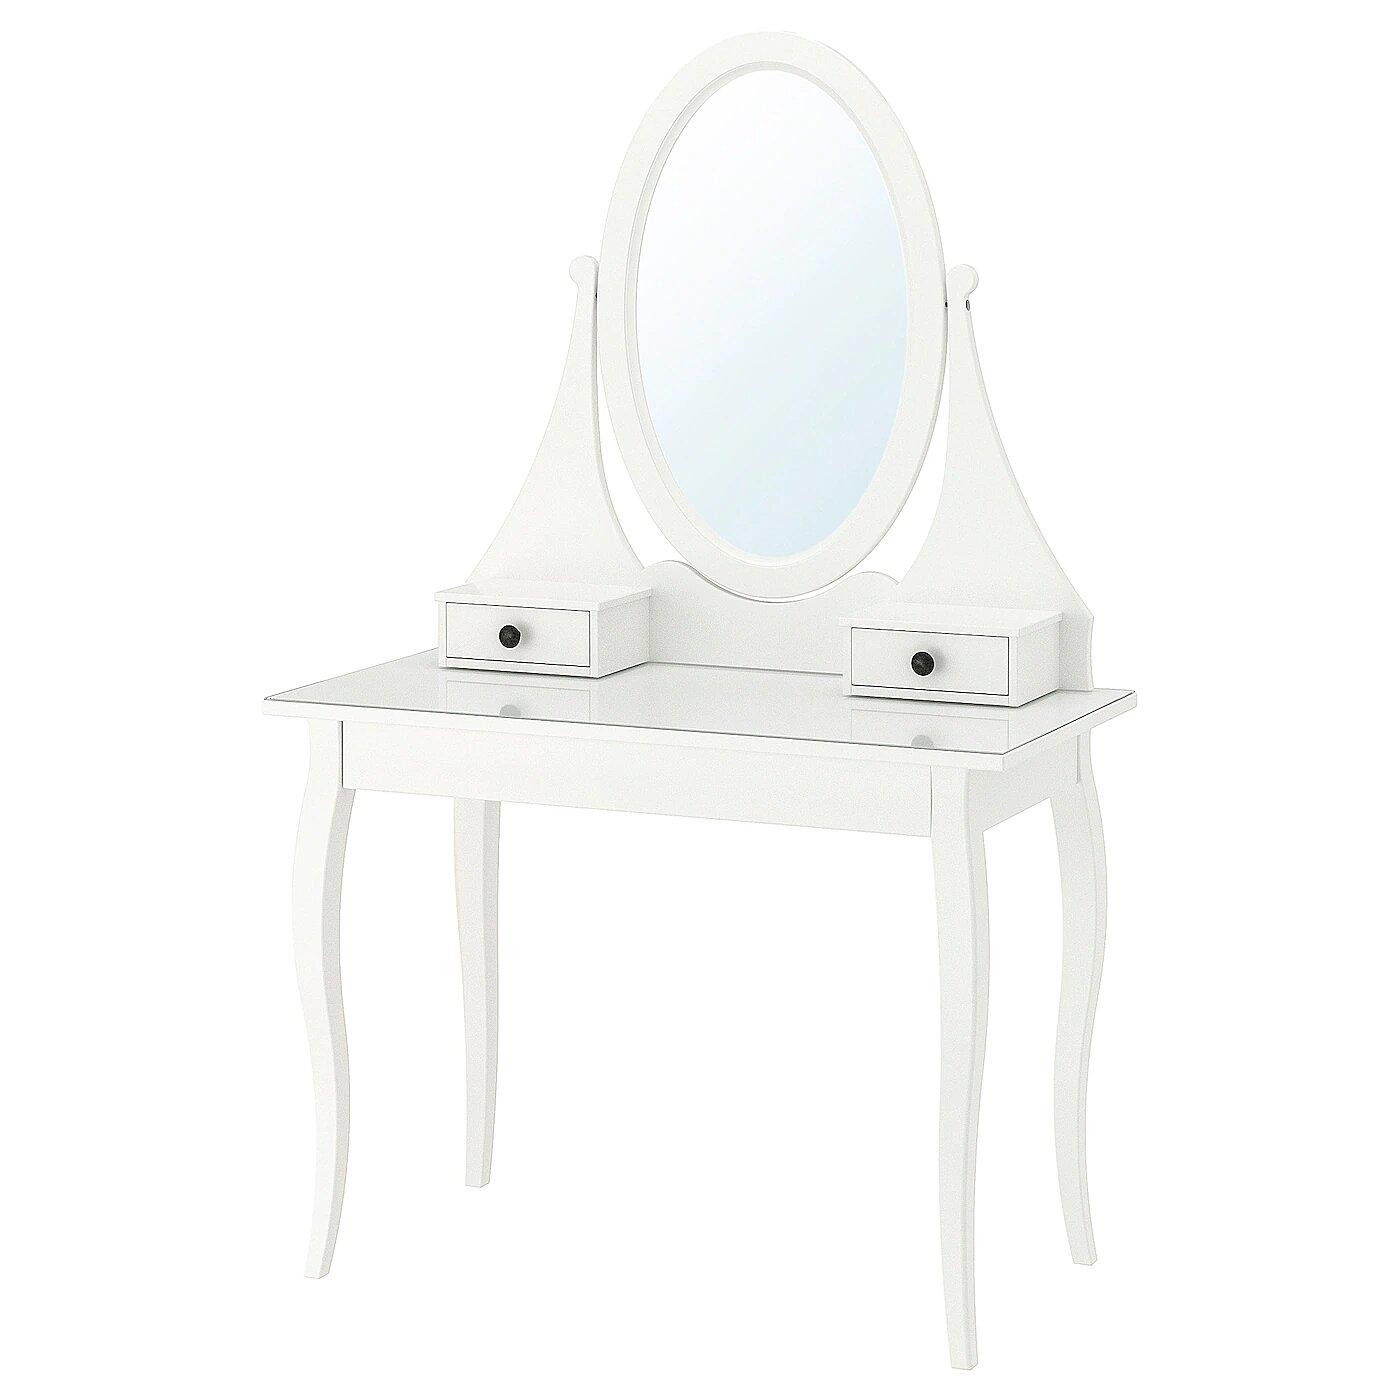 Here Are The Excellent Benefits From White Dressing Table Mirrors